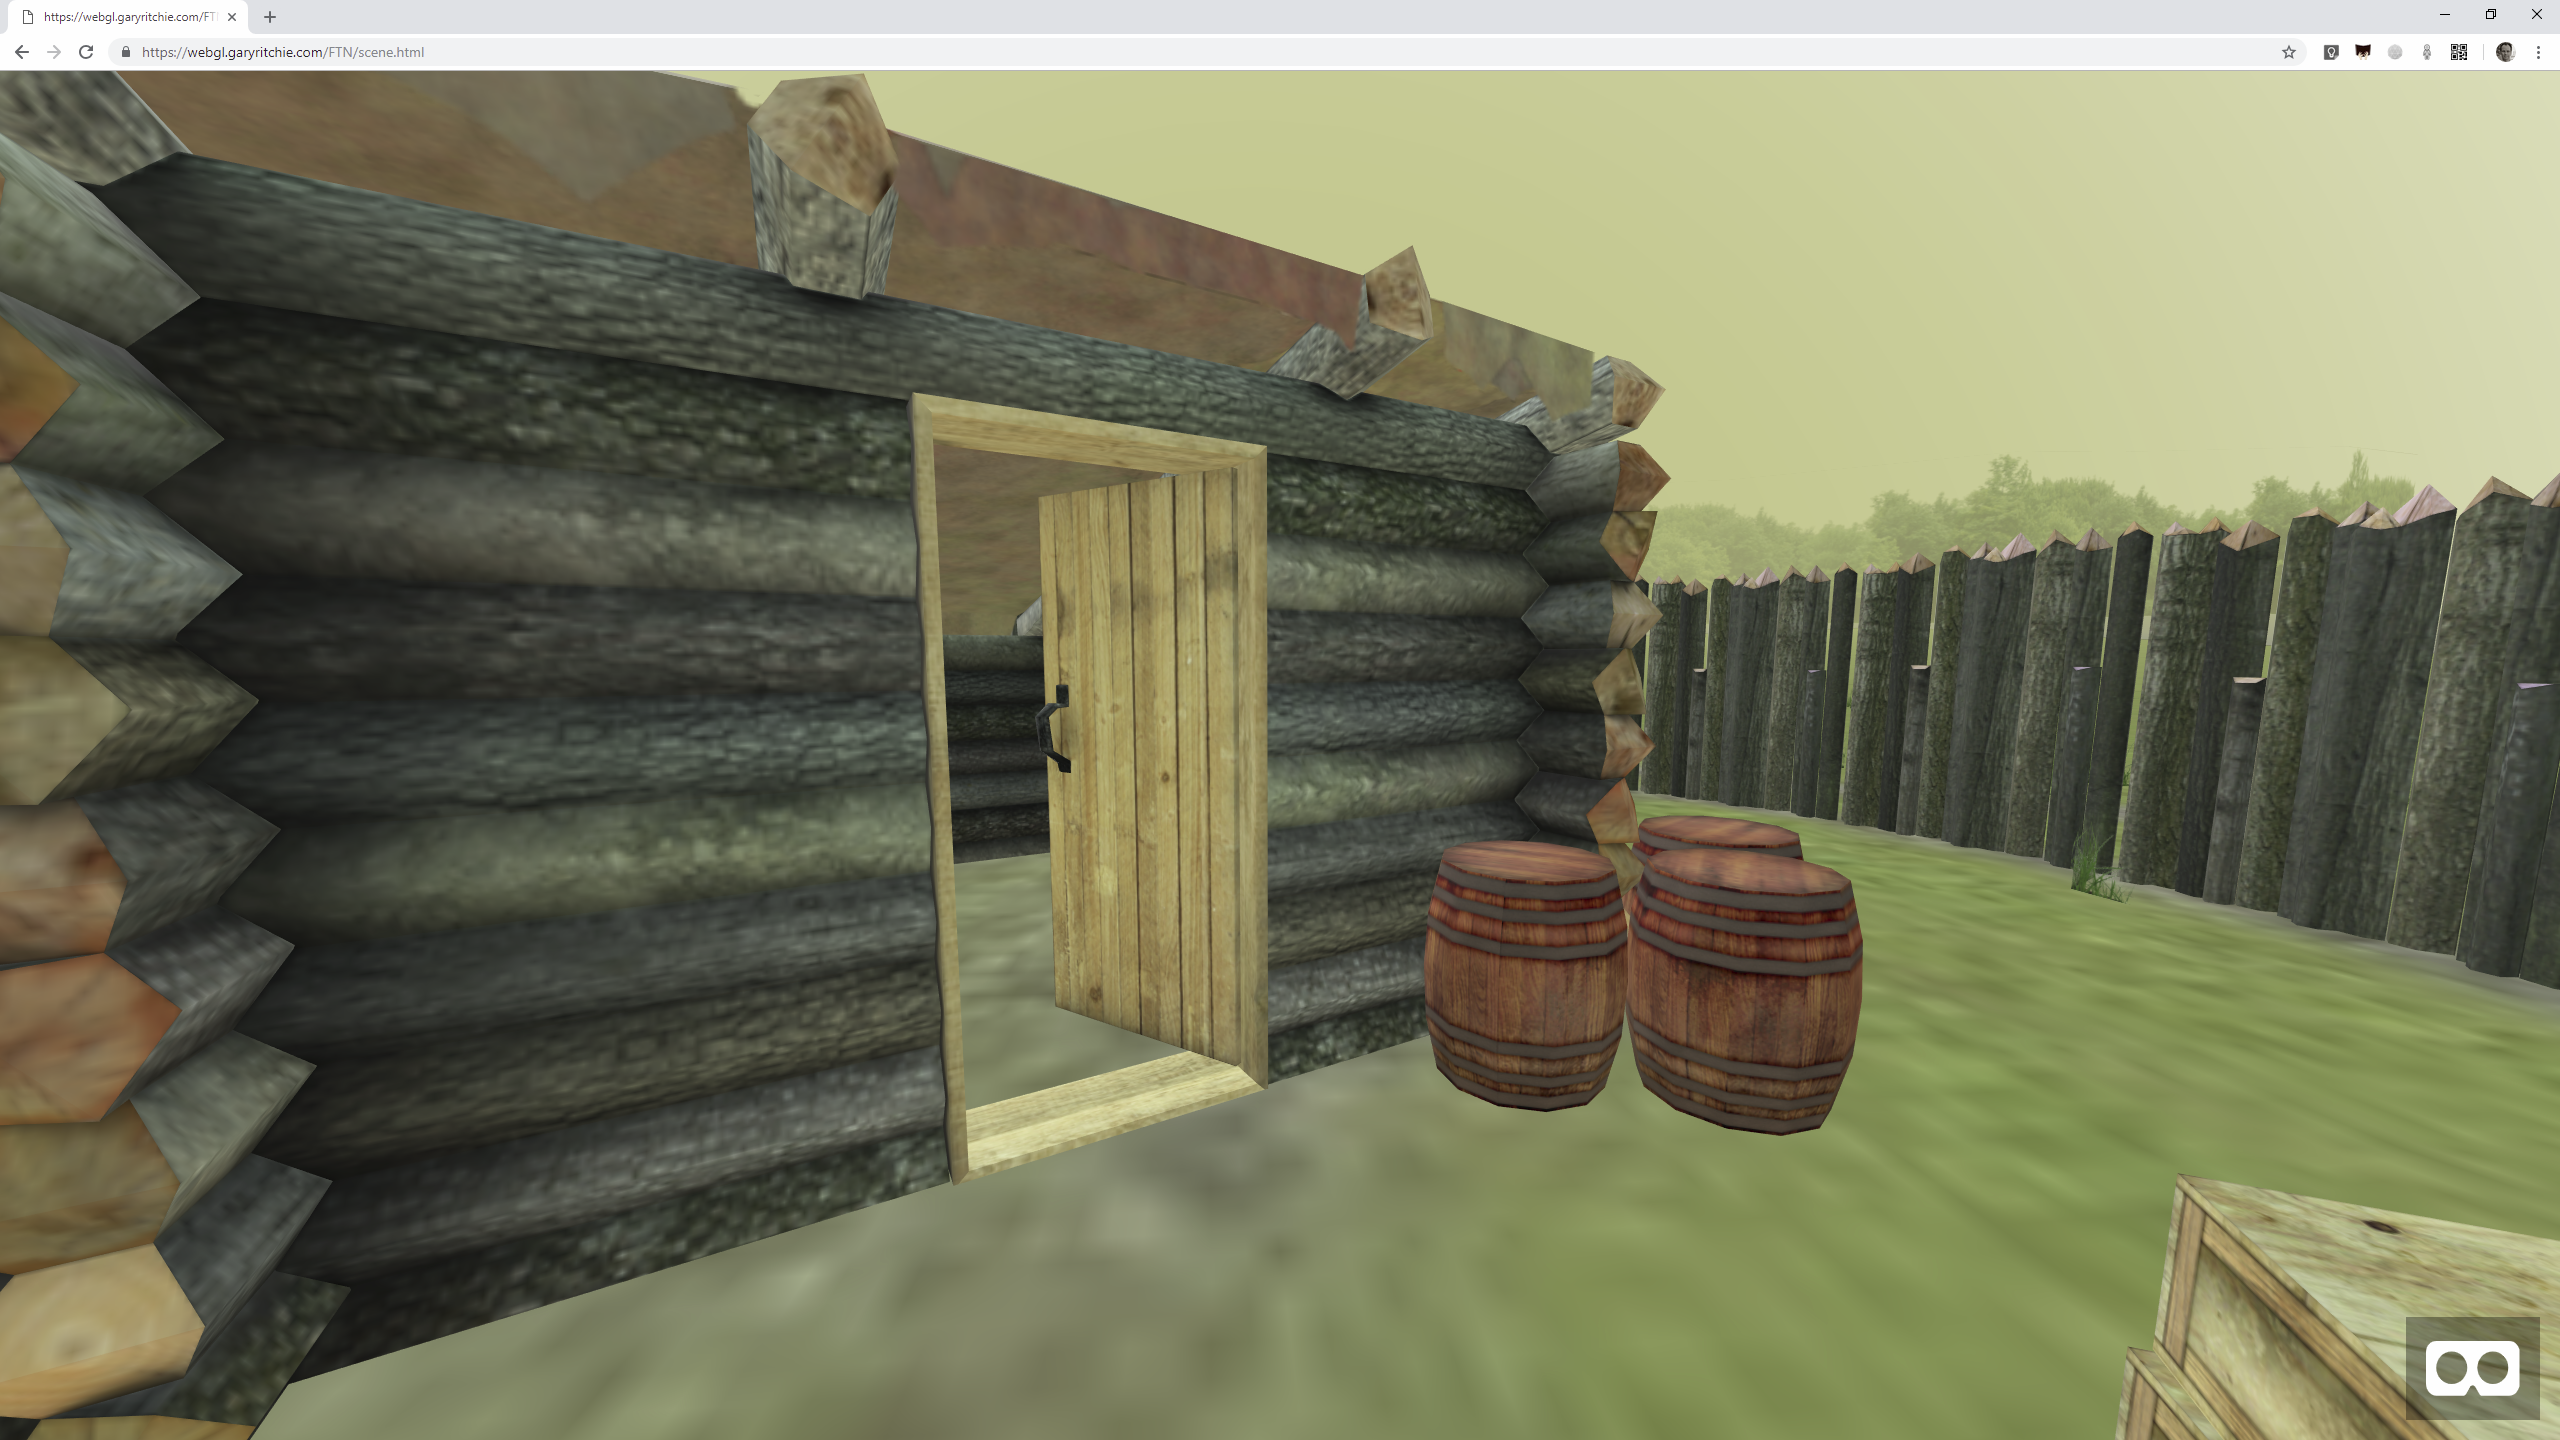 Cabin within Fort Necessity's stockade wall.